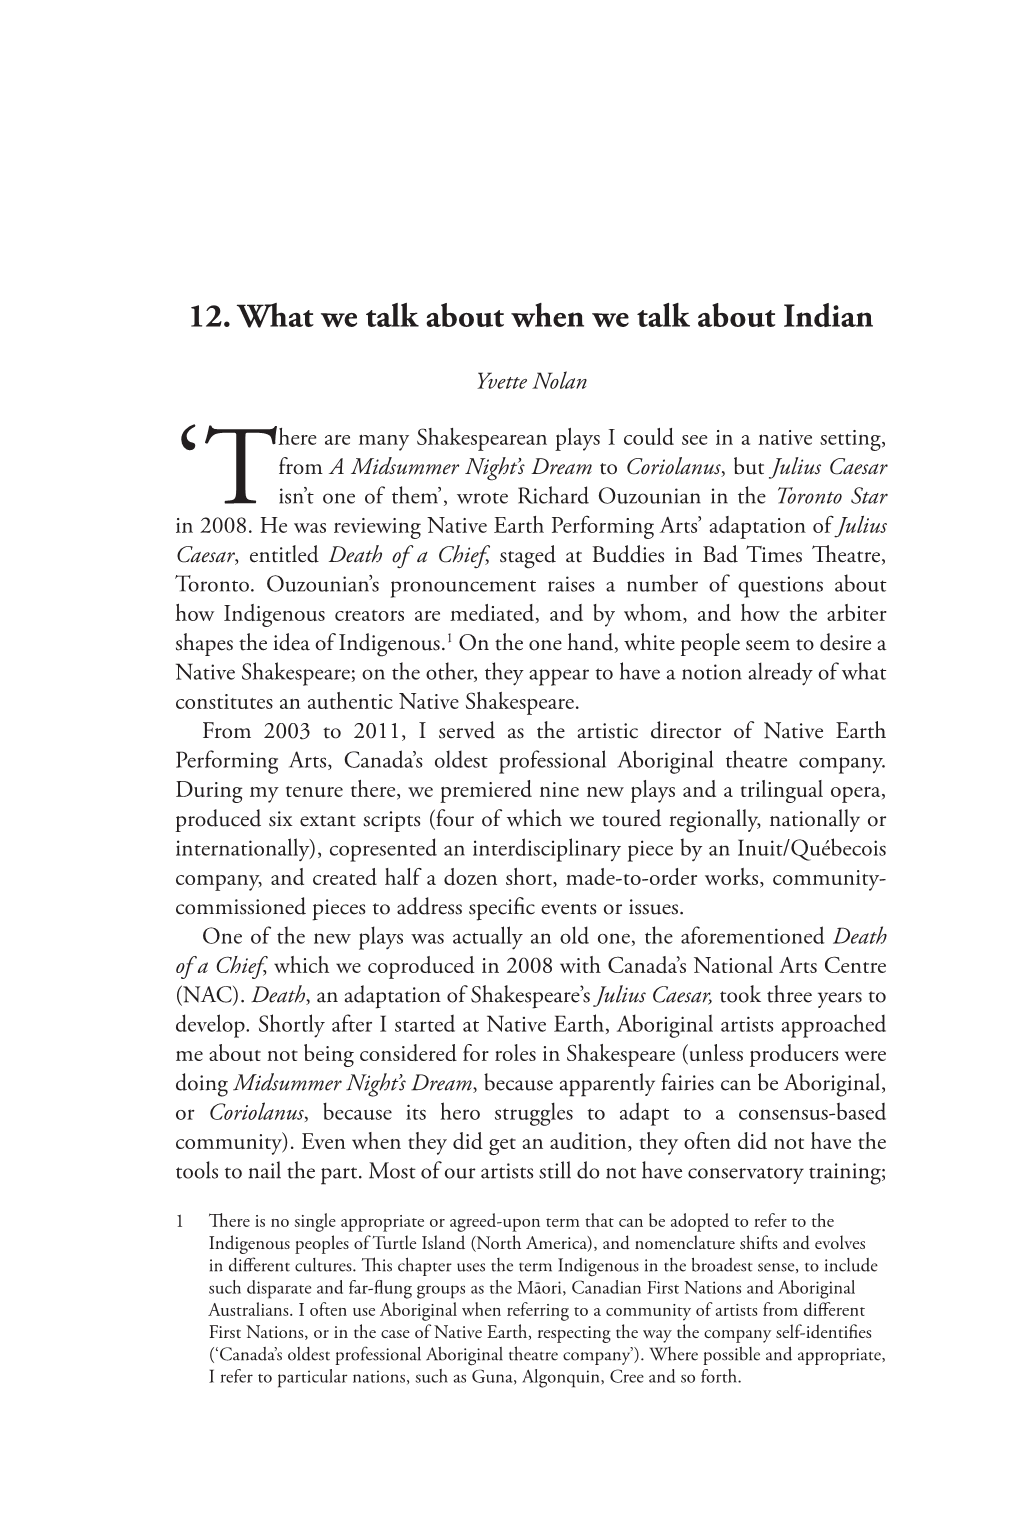 12. What We Talk About When We Talk About Indian